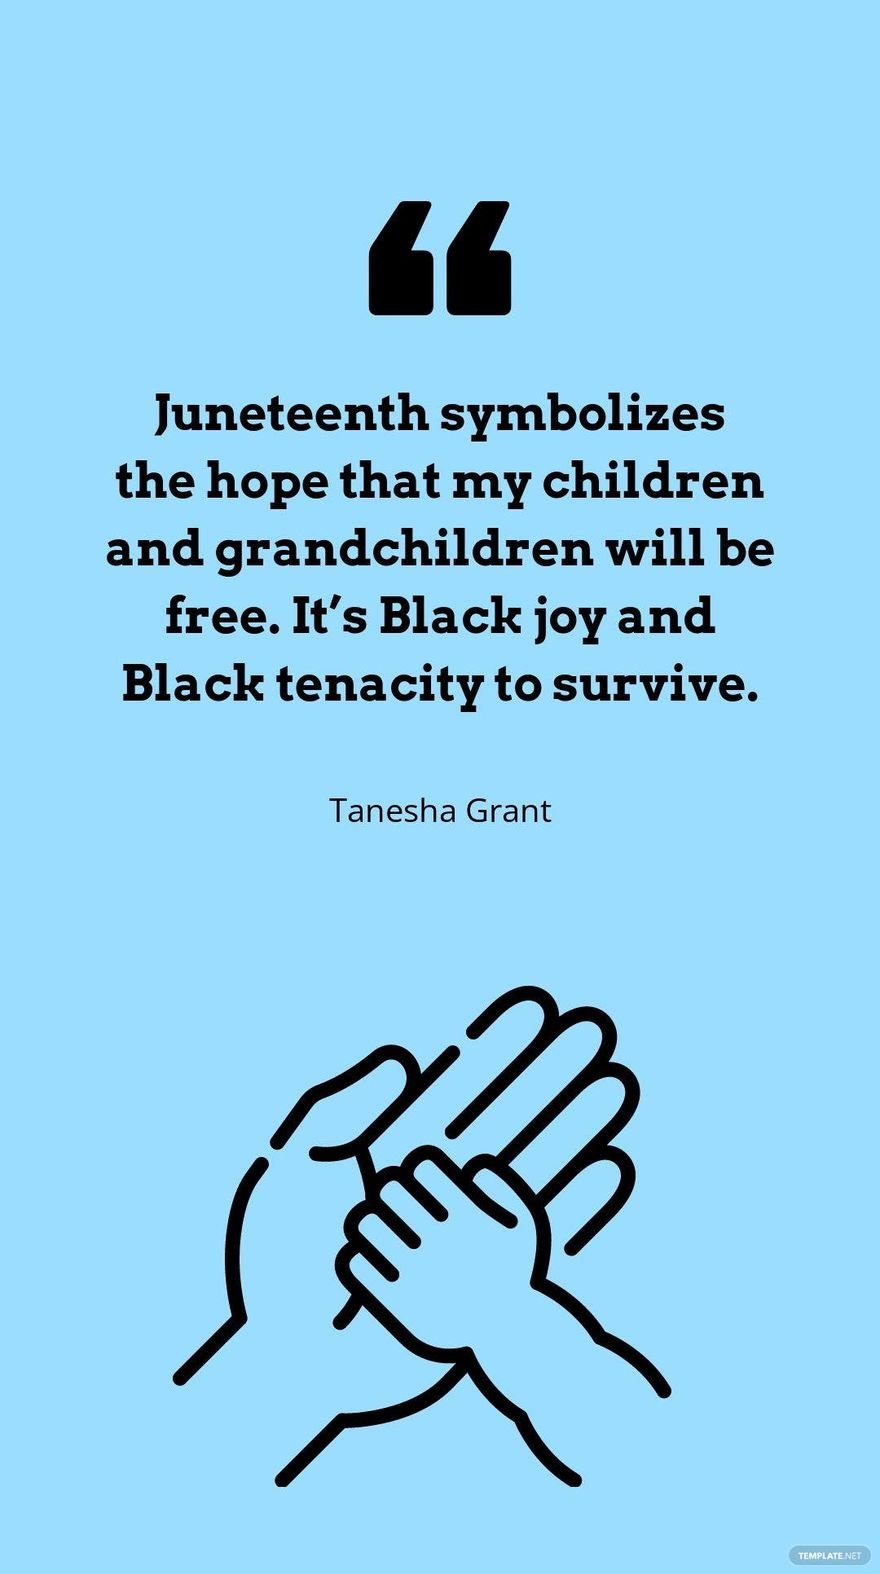 Free Tanesha Grant - Juneteenth symbolizes the hope that my children and grandchildren will be free. It’s Black joy and Black tenacity to survive. in JPG